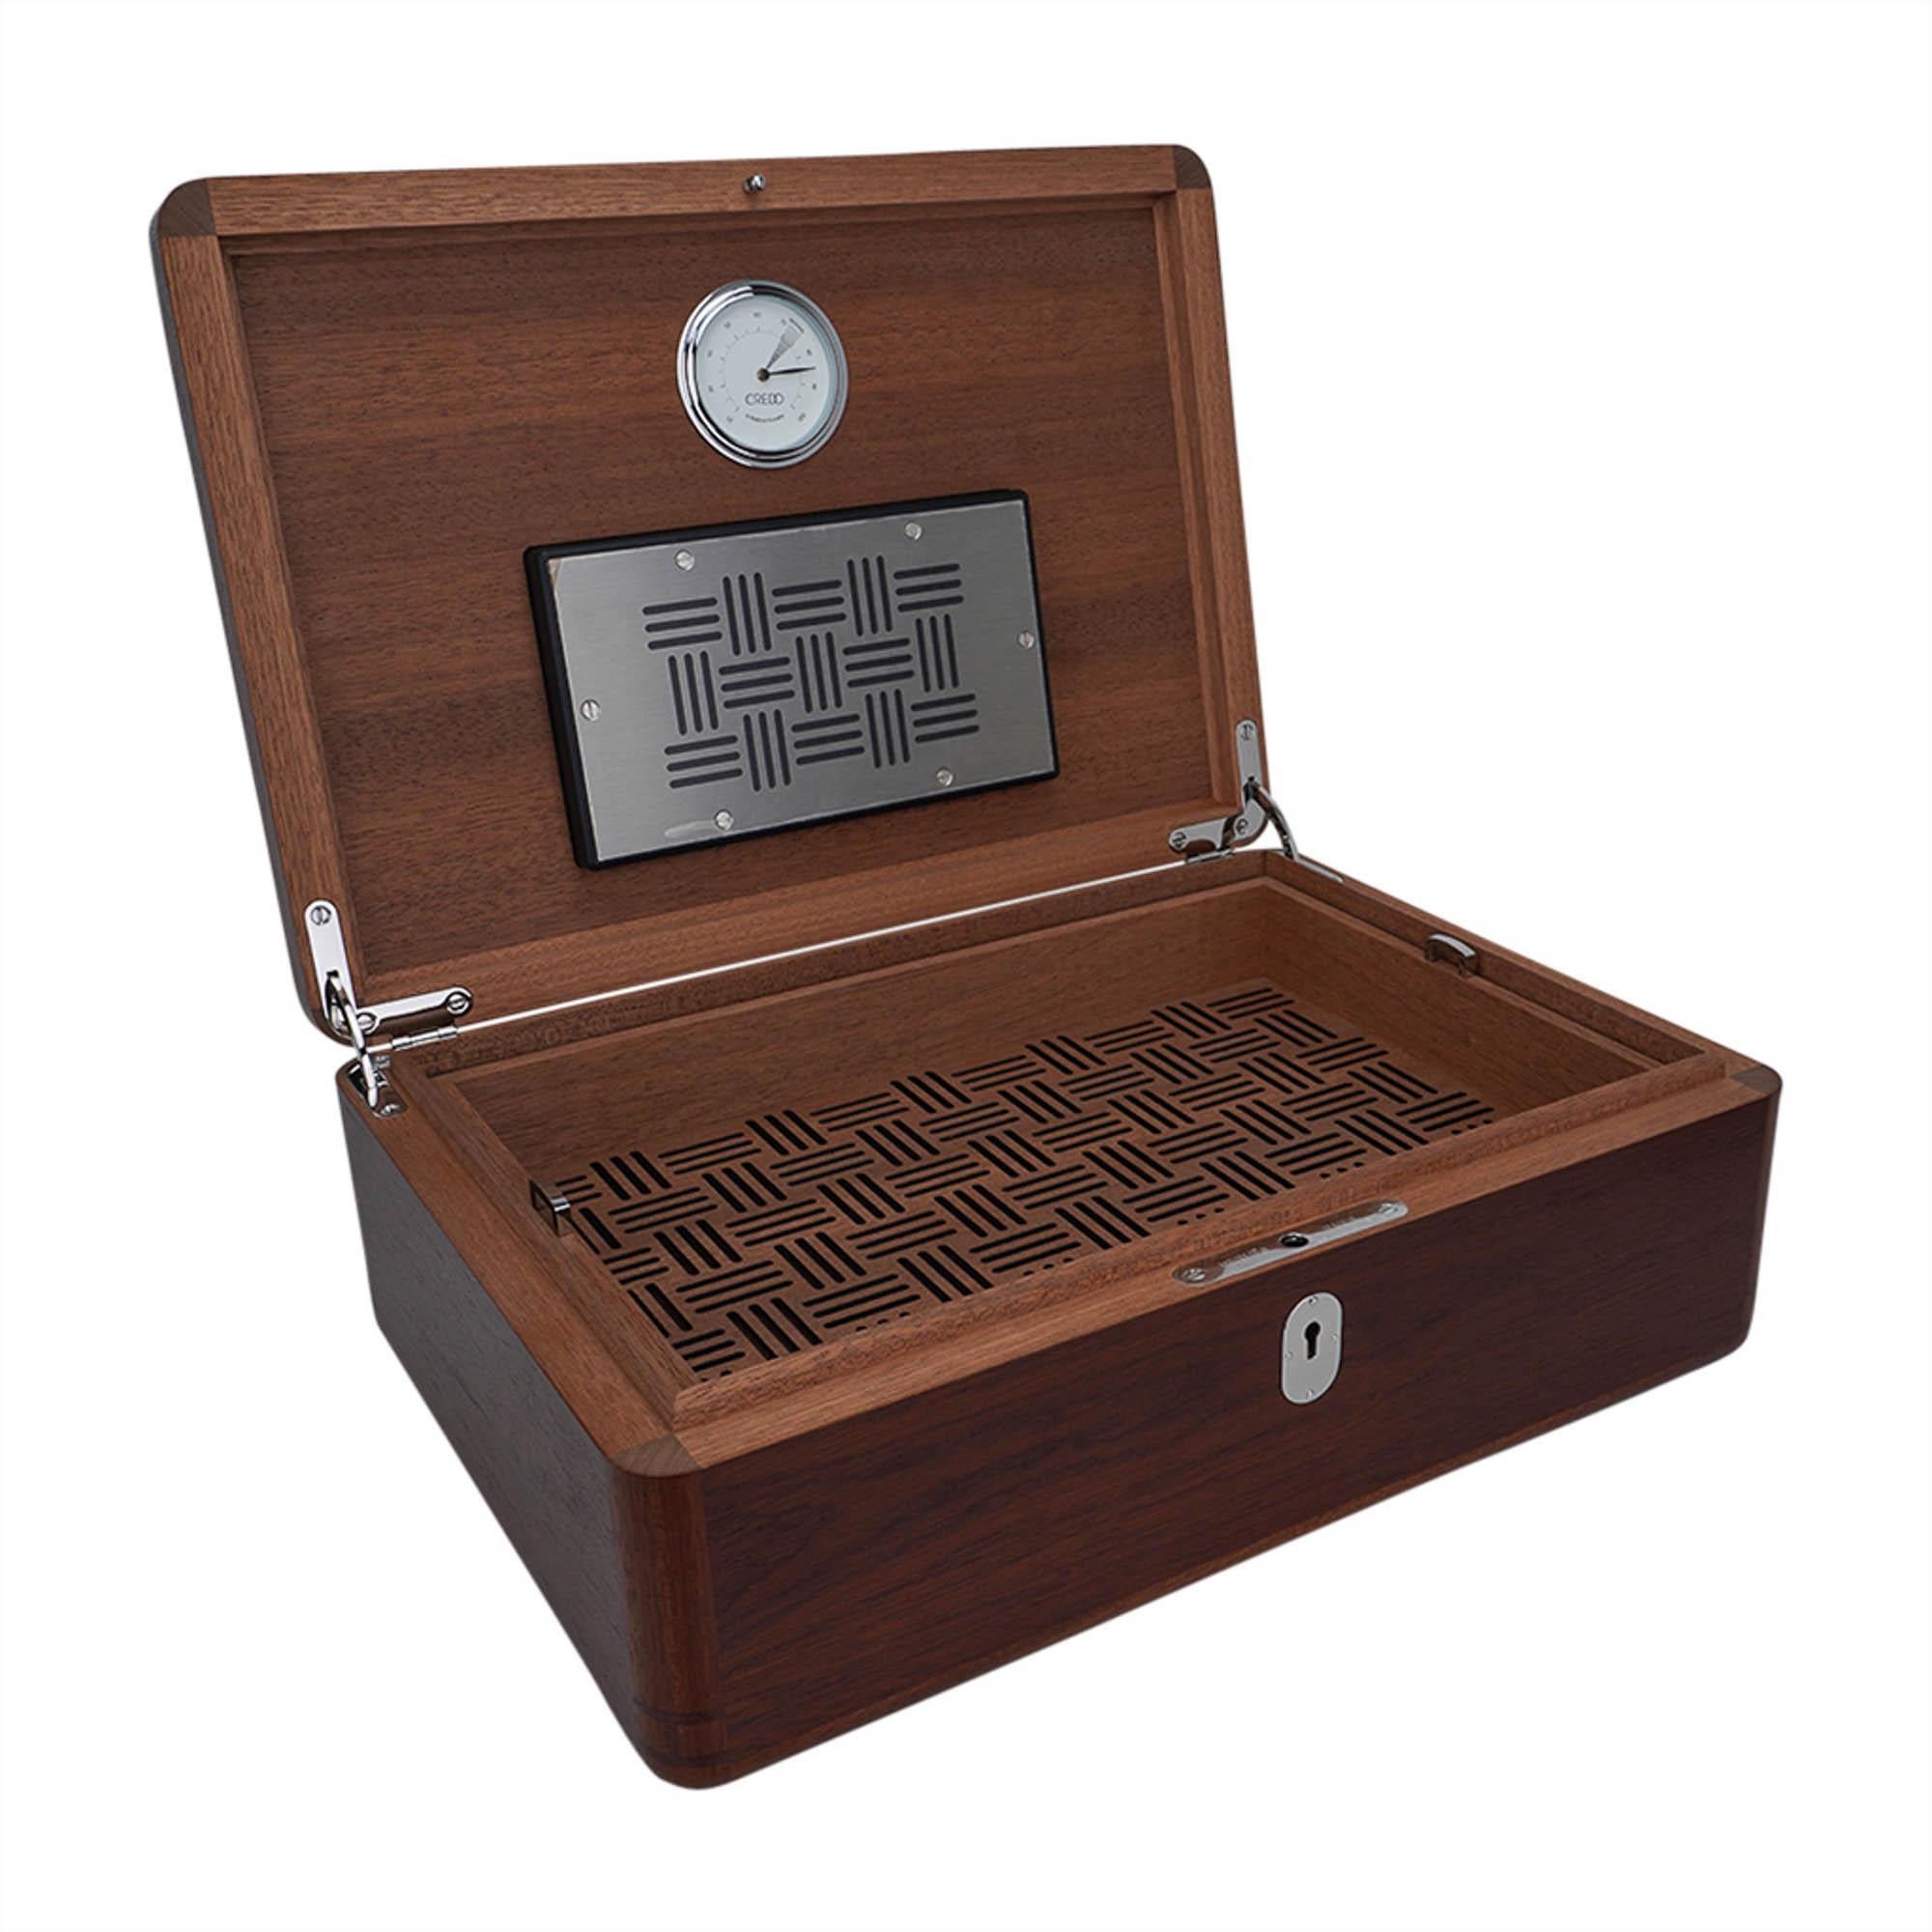 Hermes Coffret a Cigares Humidor Limited Edition Sycamore Holz Sesam Eidechse im Angebot 9